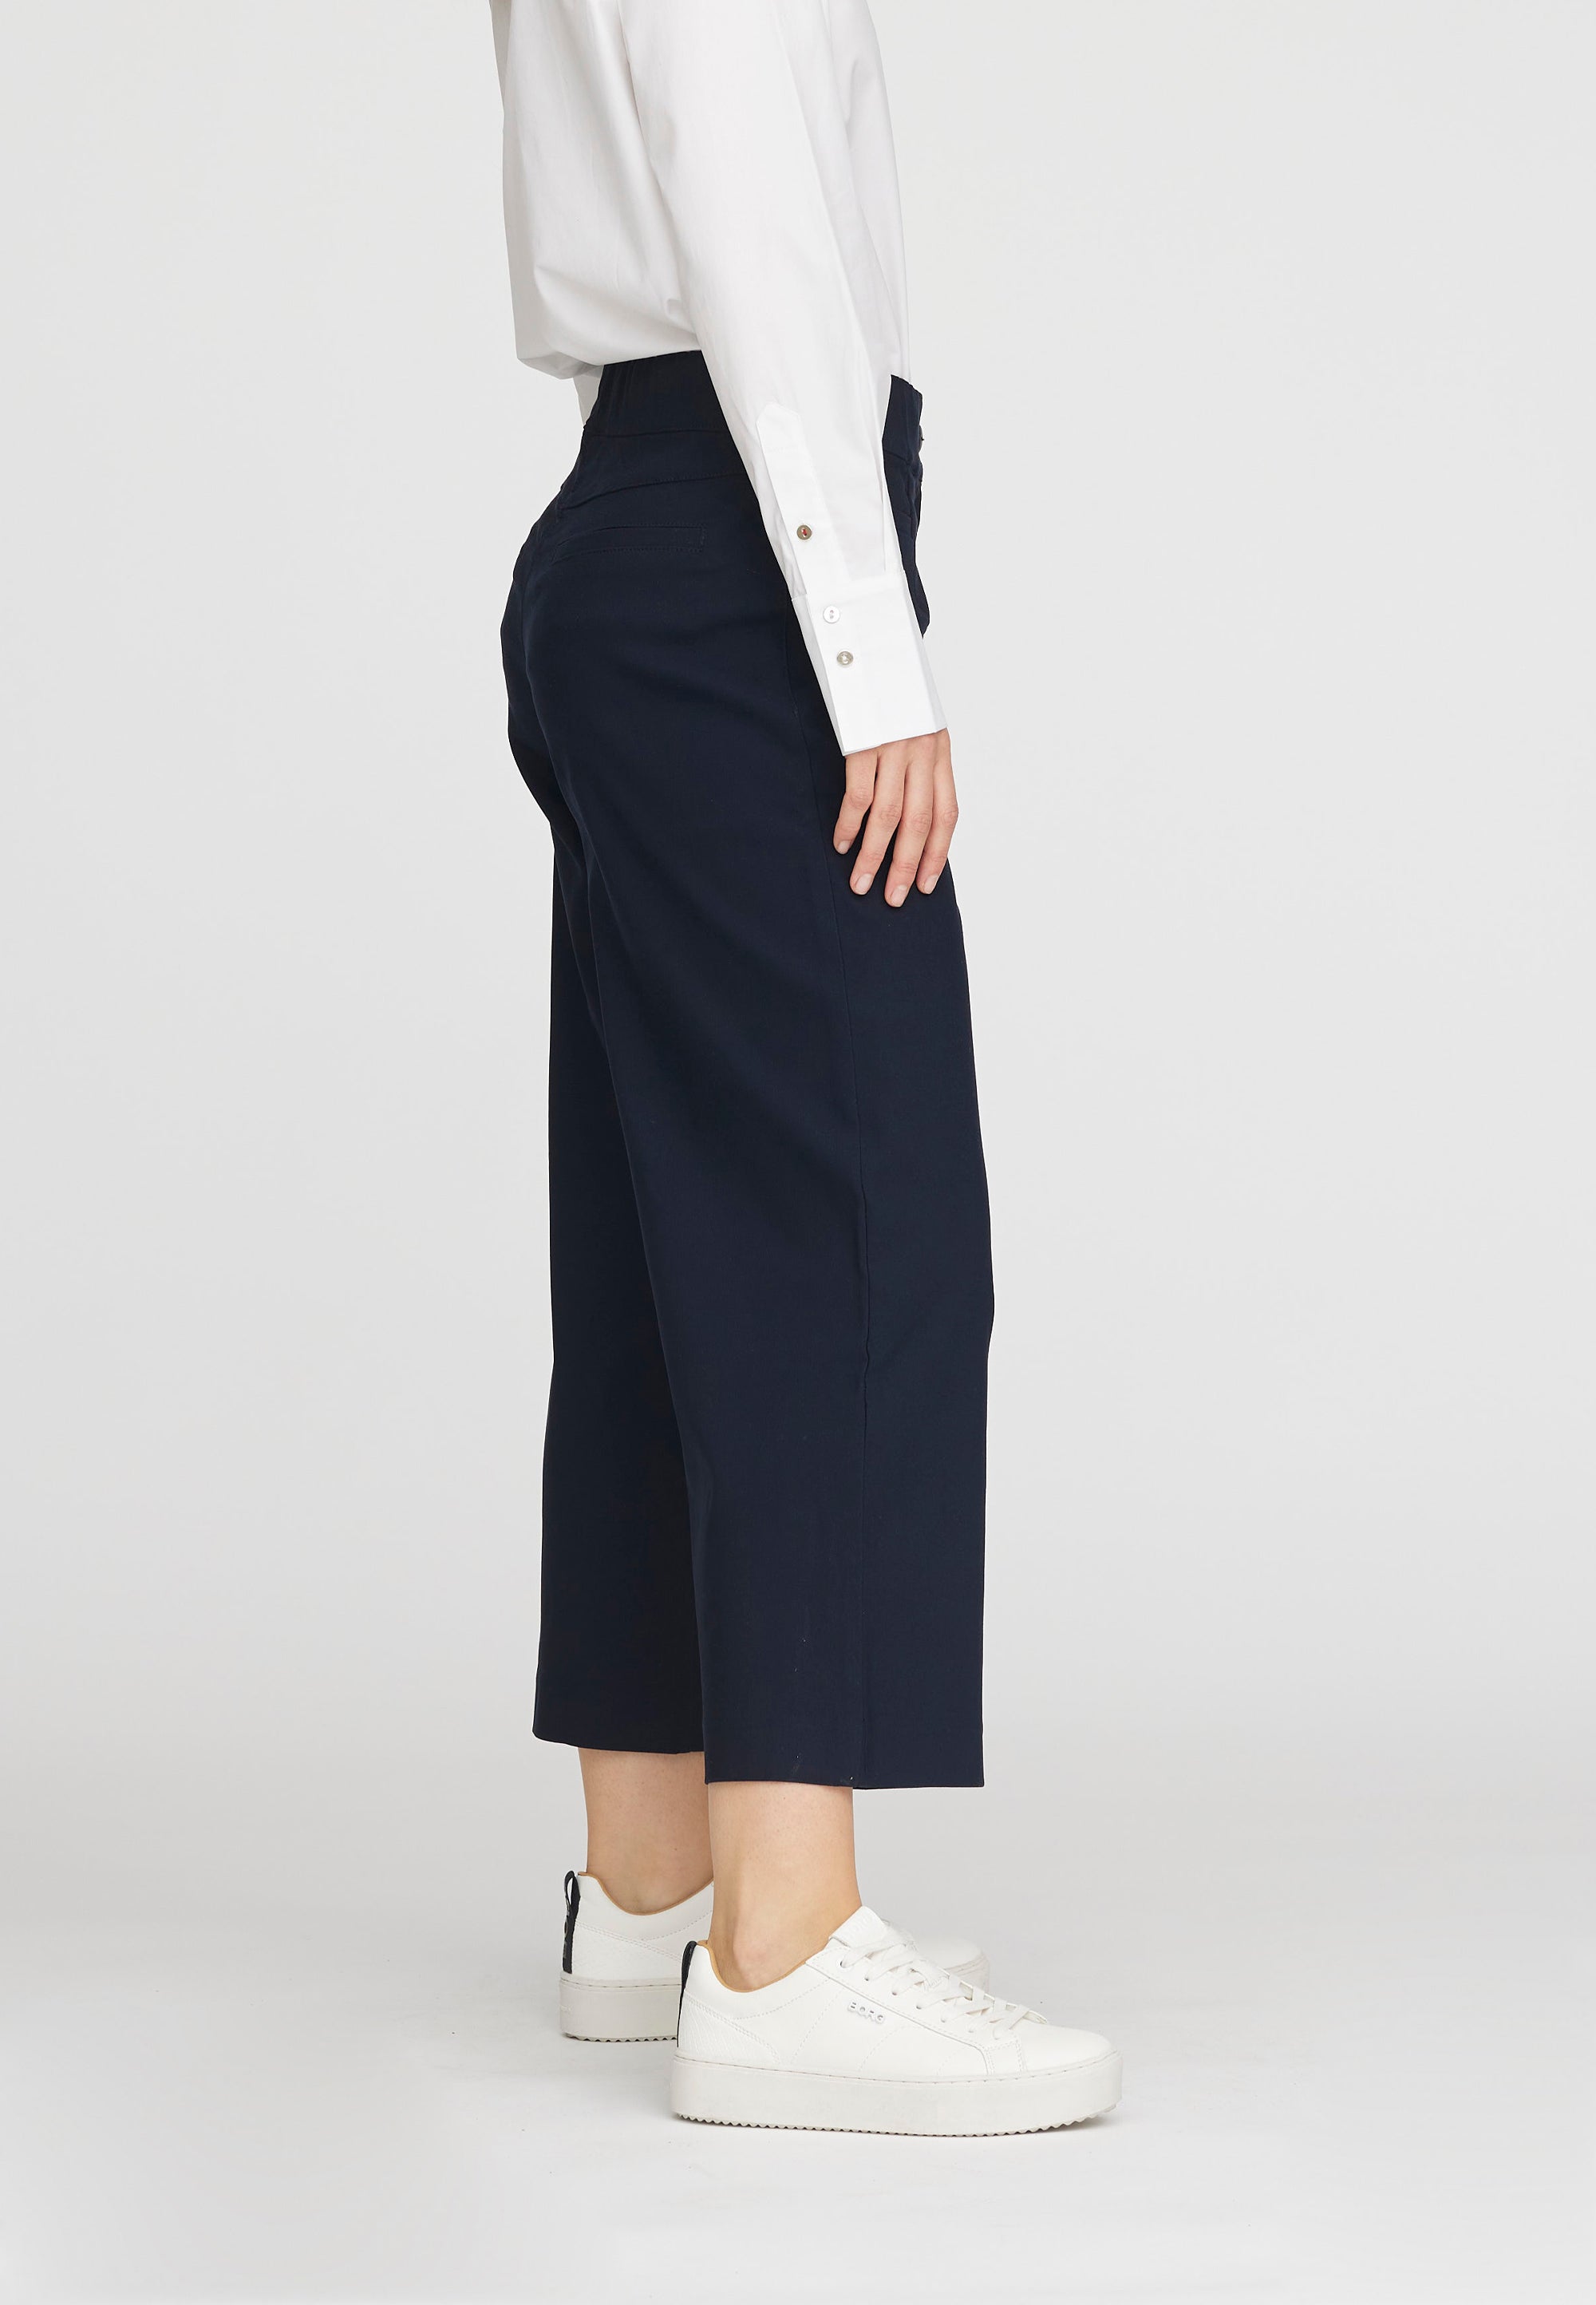 LAURIE Lester Loose Crop Trousers LOOSE 49118 Navy